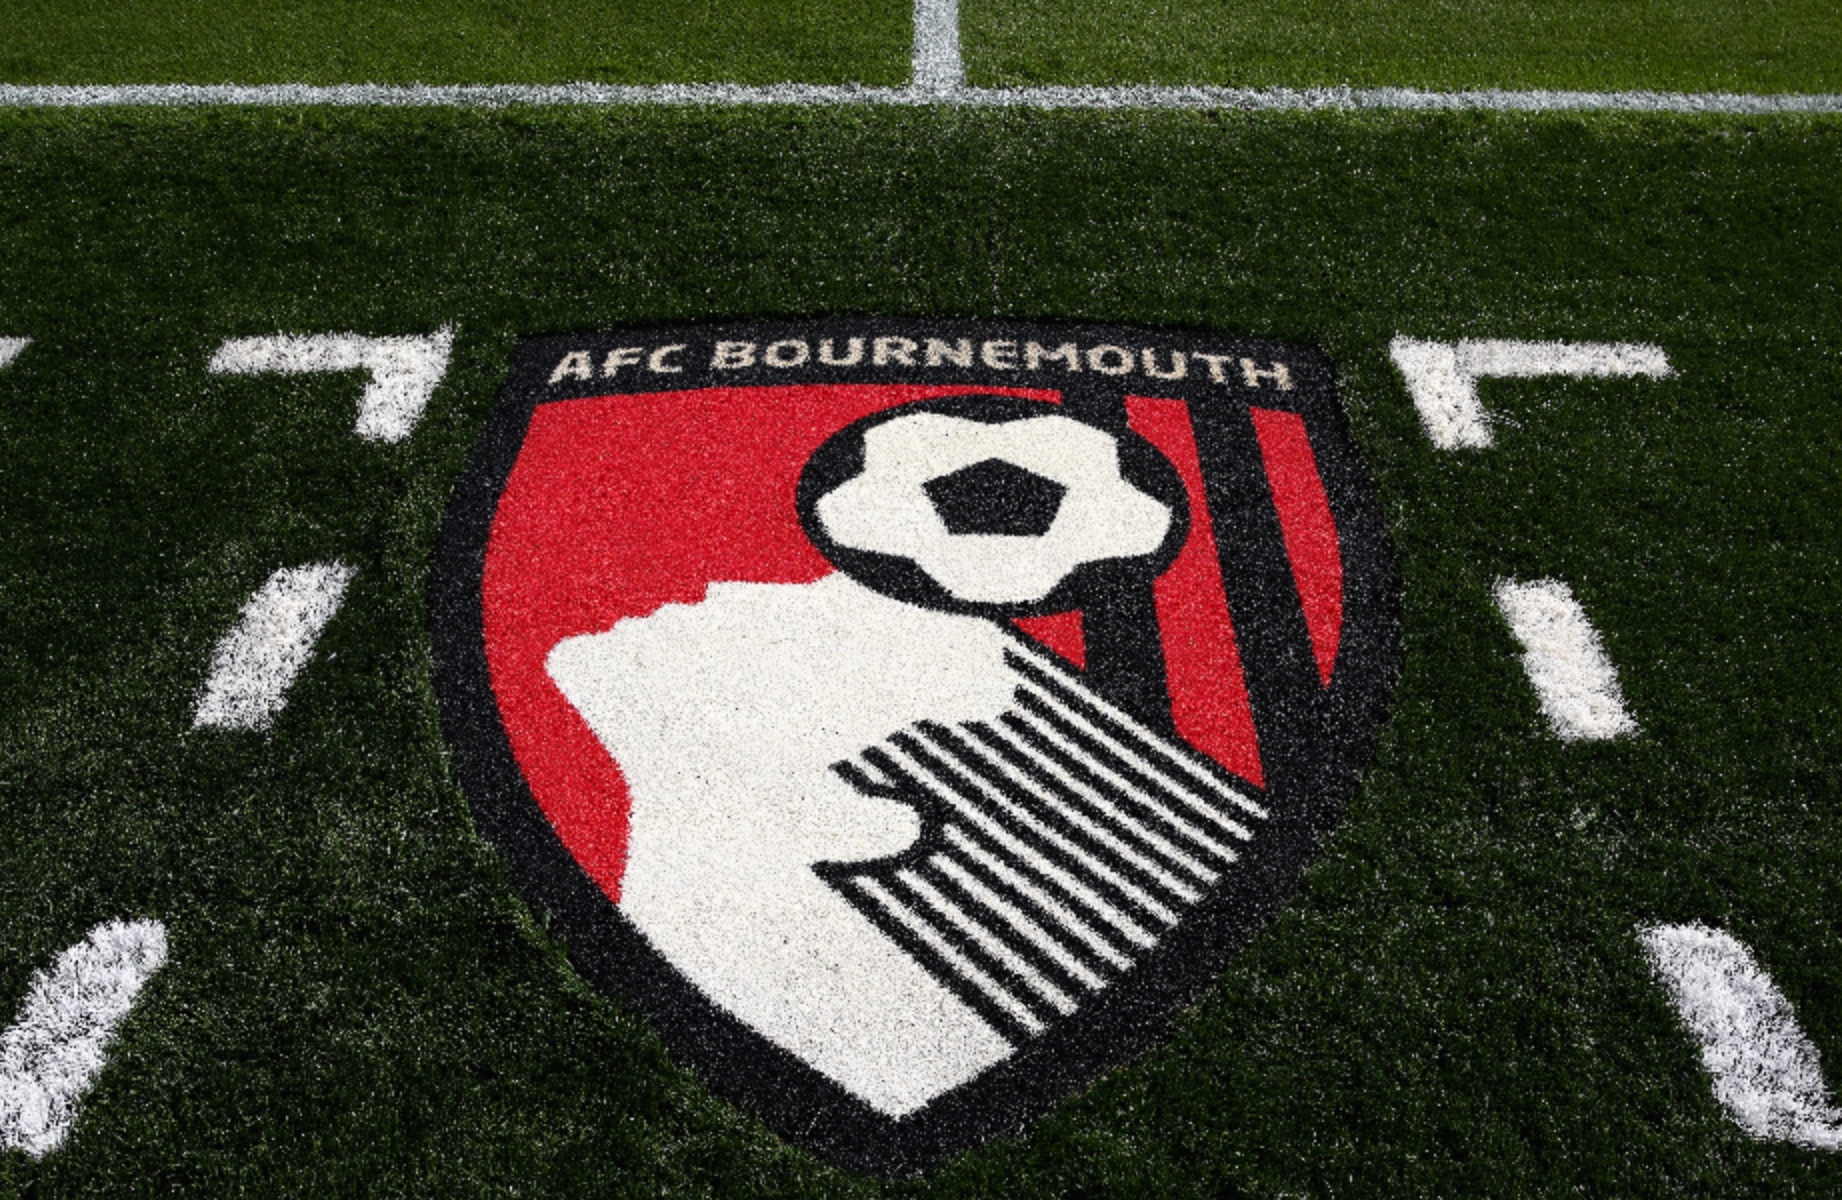 Bournemouth's Richard Hughes is of interest to Liverpool and Newcastle.